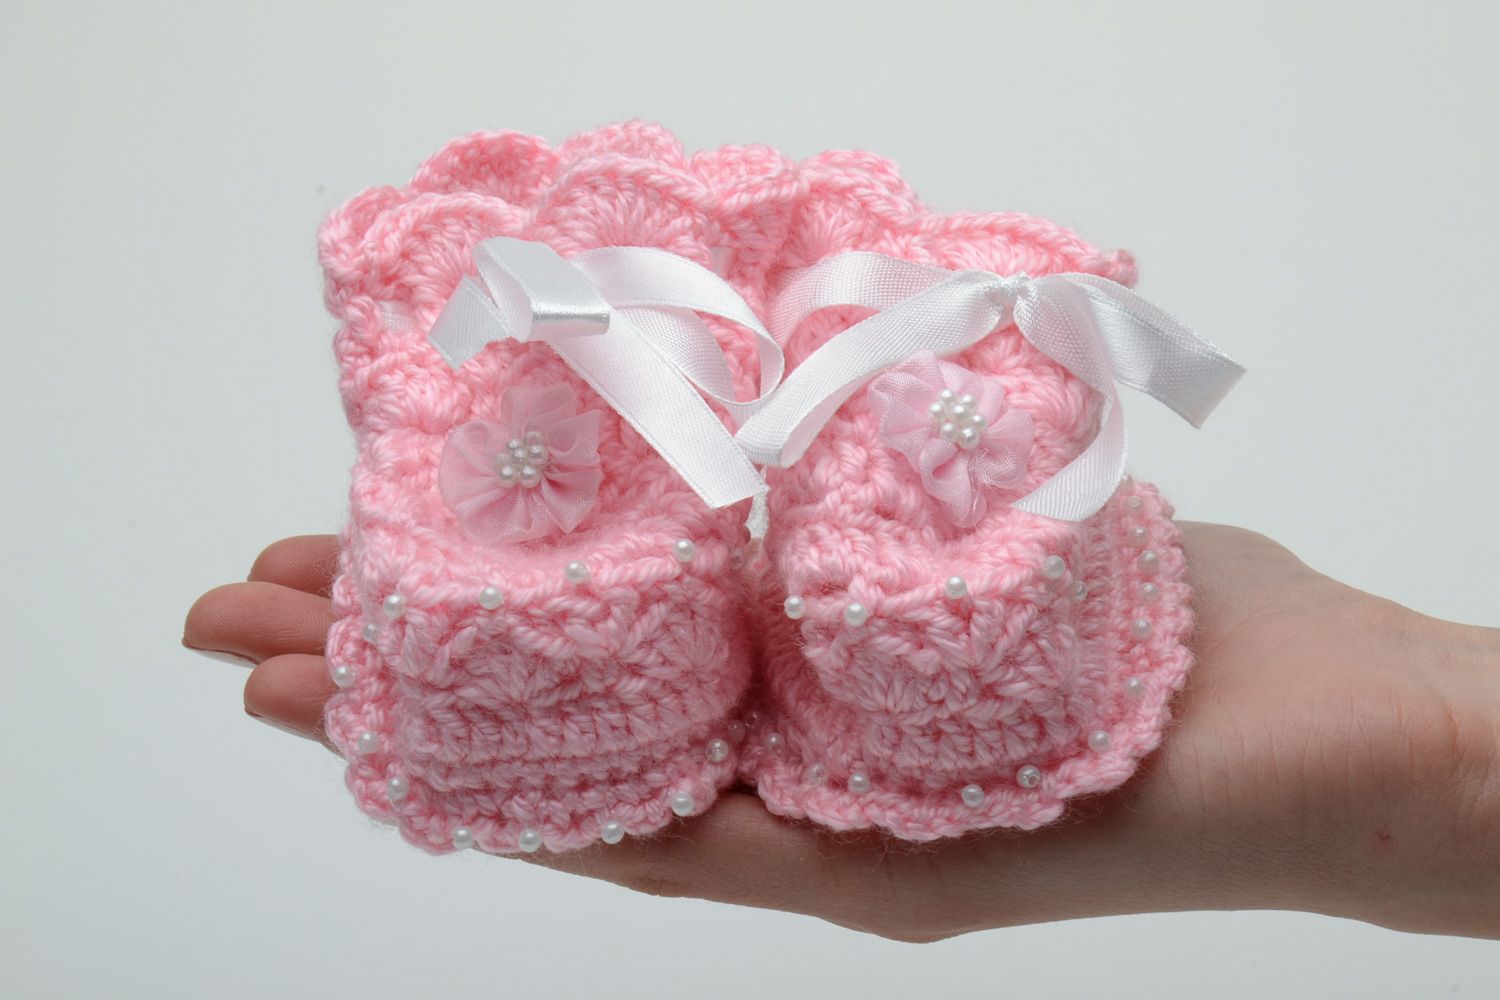 Handmade pink crochet baby set booties and hat 2 items photo 5